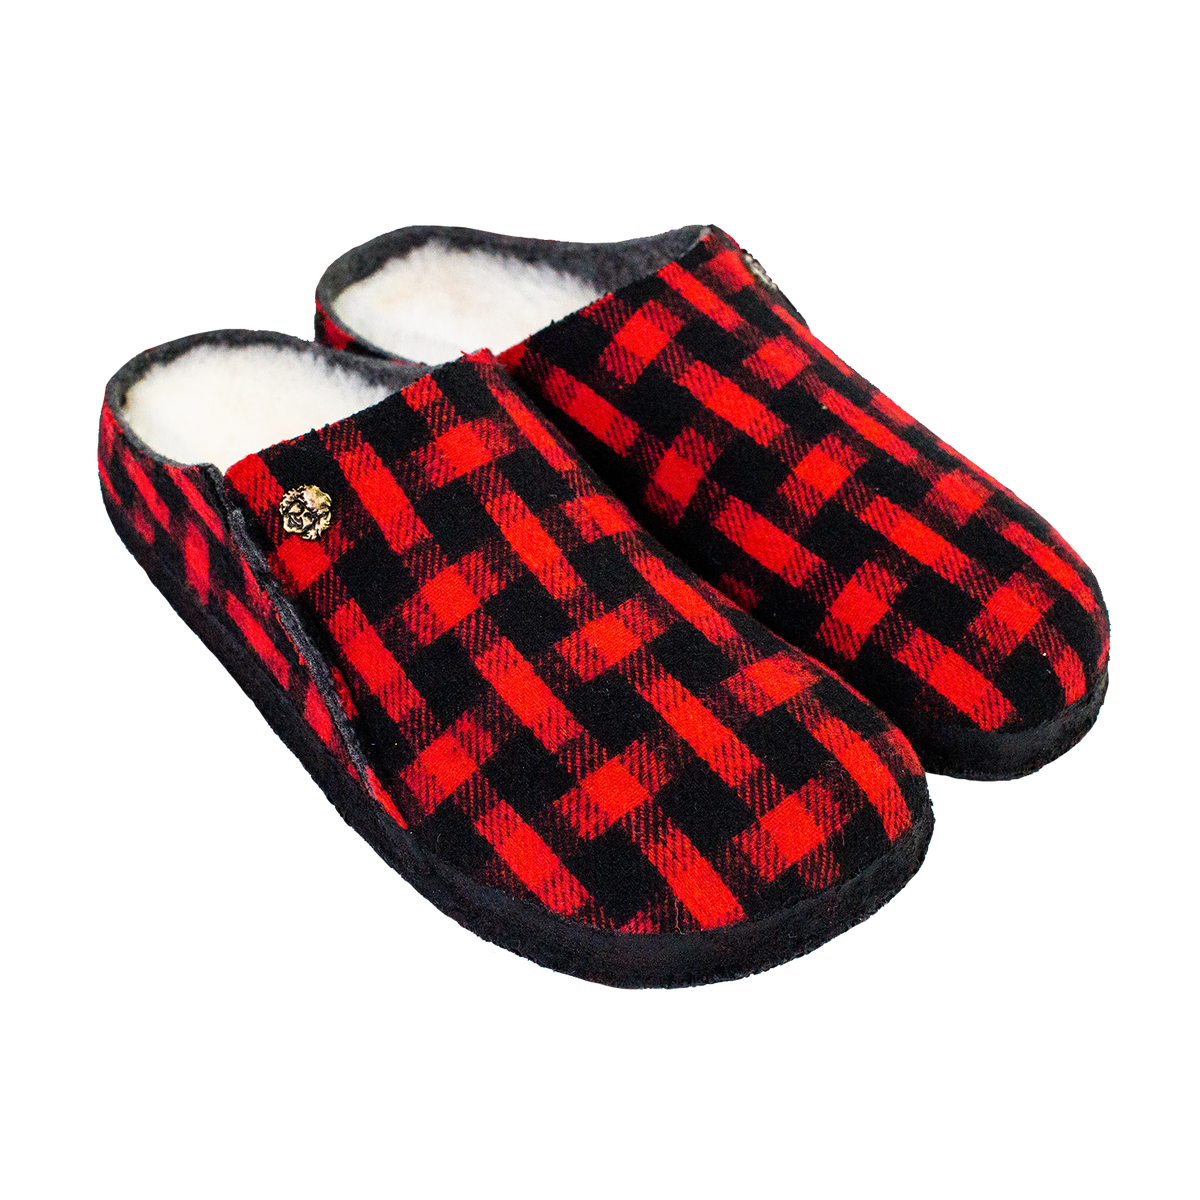 AMEICO - Official US Distributor of SUBU - Fall & Winter Slippers - Red